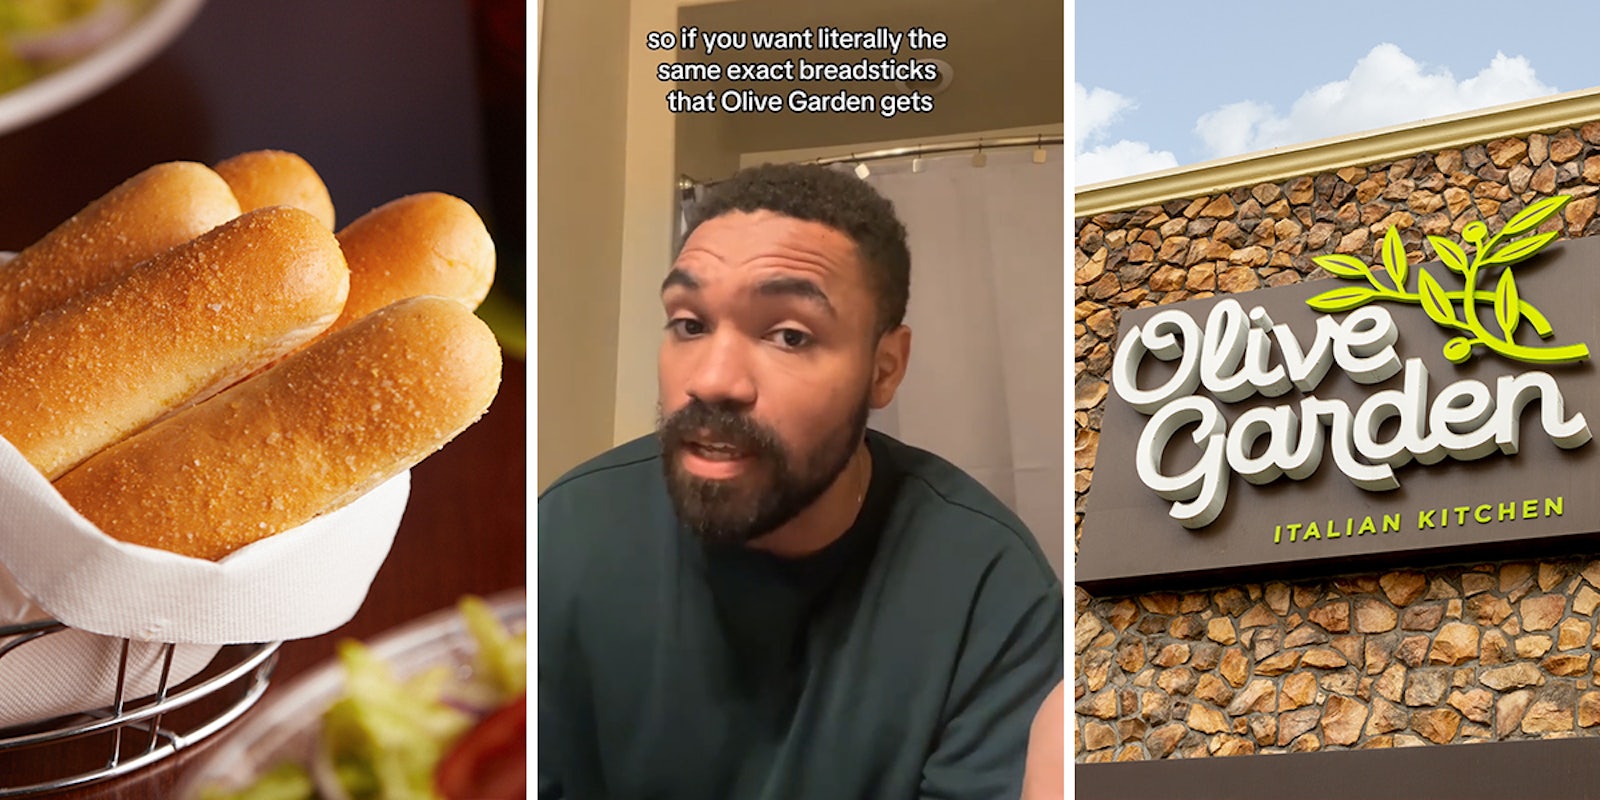 breadsticks in basket (l) man speaking with caption 'so if you want the literally exact breadsticks that Olive Garden gets' (c) Olive Garden sign on building (r)